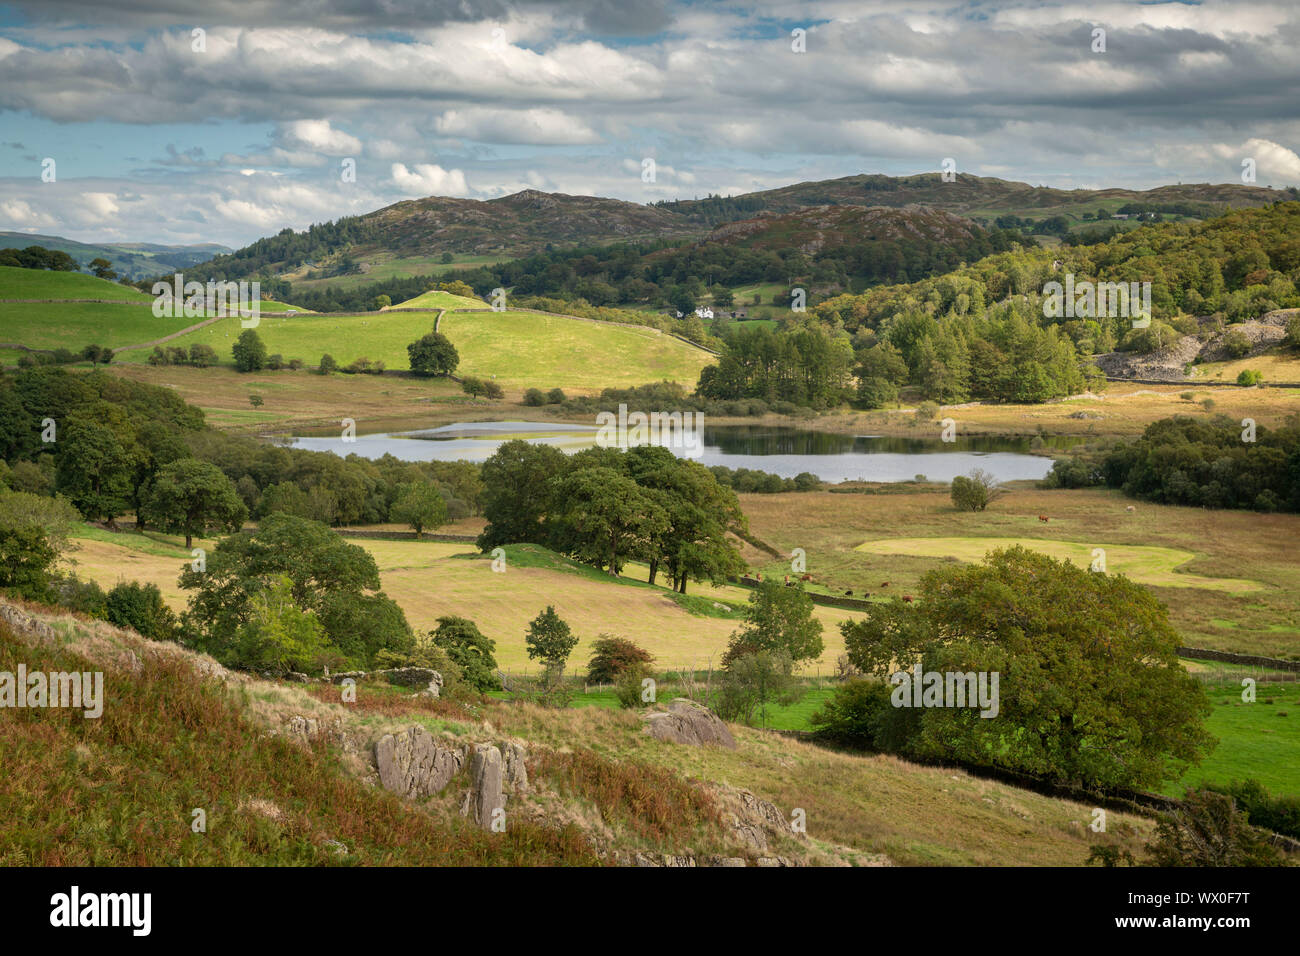 Little Langdale Valley in the Lake District National Park, UNESCO World Heritage Site, Cumbria, England, United Kingdom, Europe Stock Photo